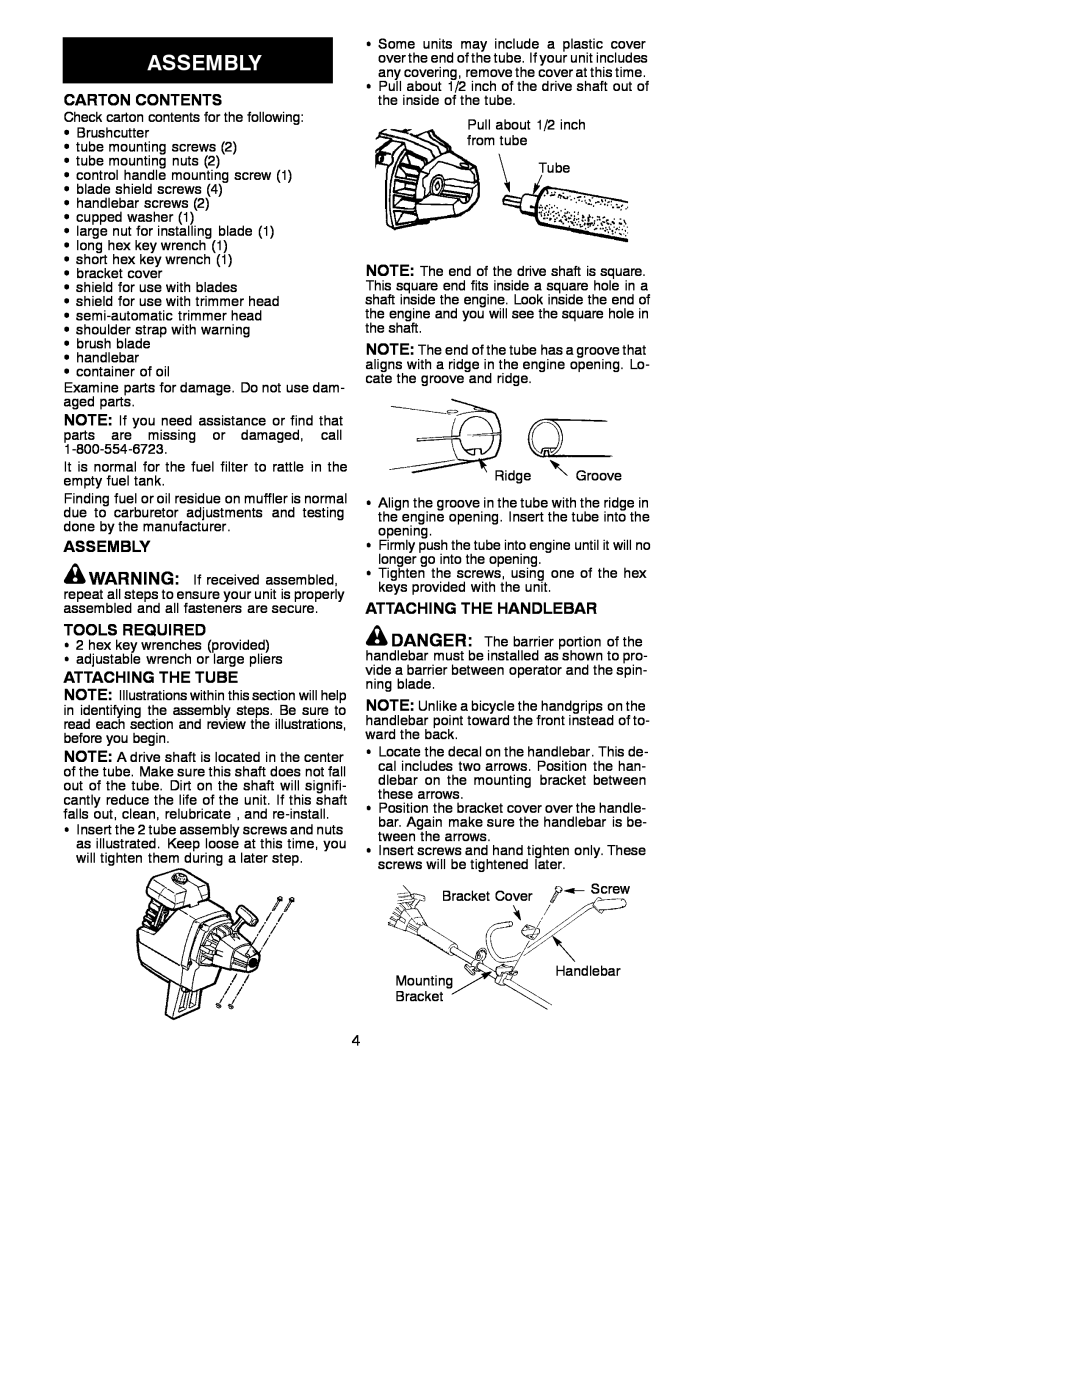 Poulan BC3100 operating instructions Carton Contents, Assembly, Tools Required, Attaching The Tube, Attaching The Handlebar 